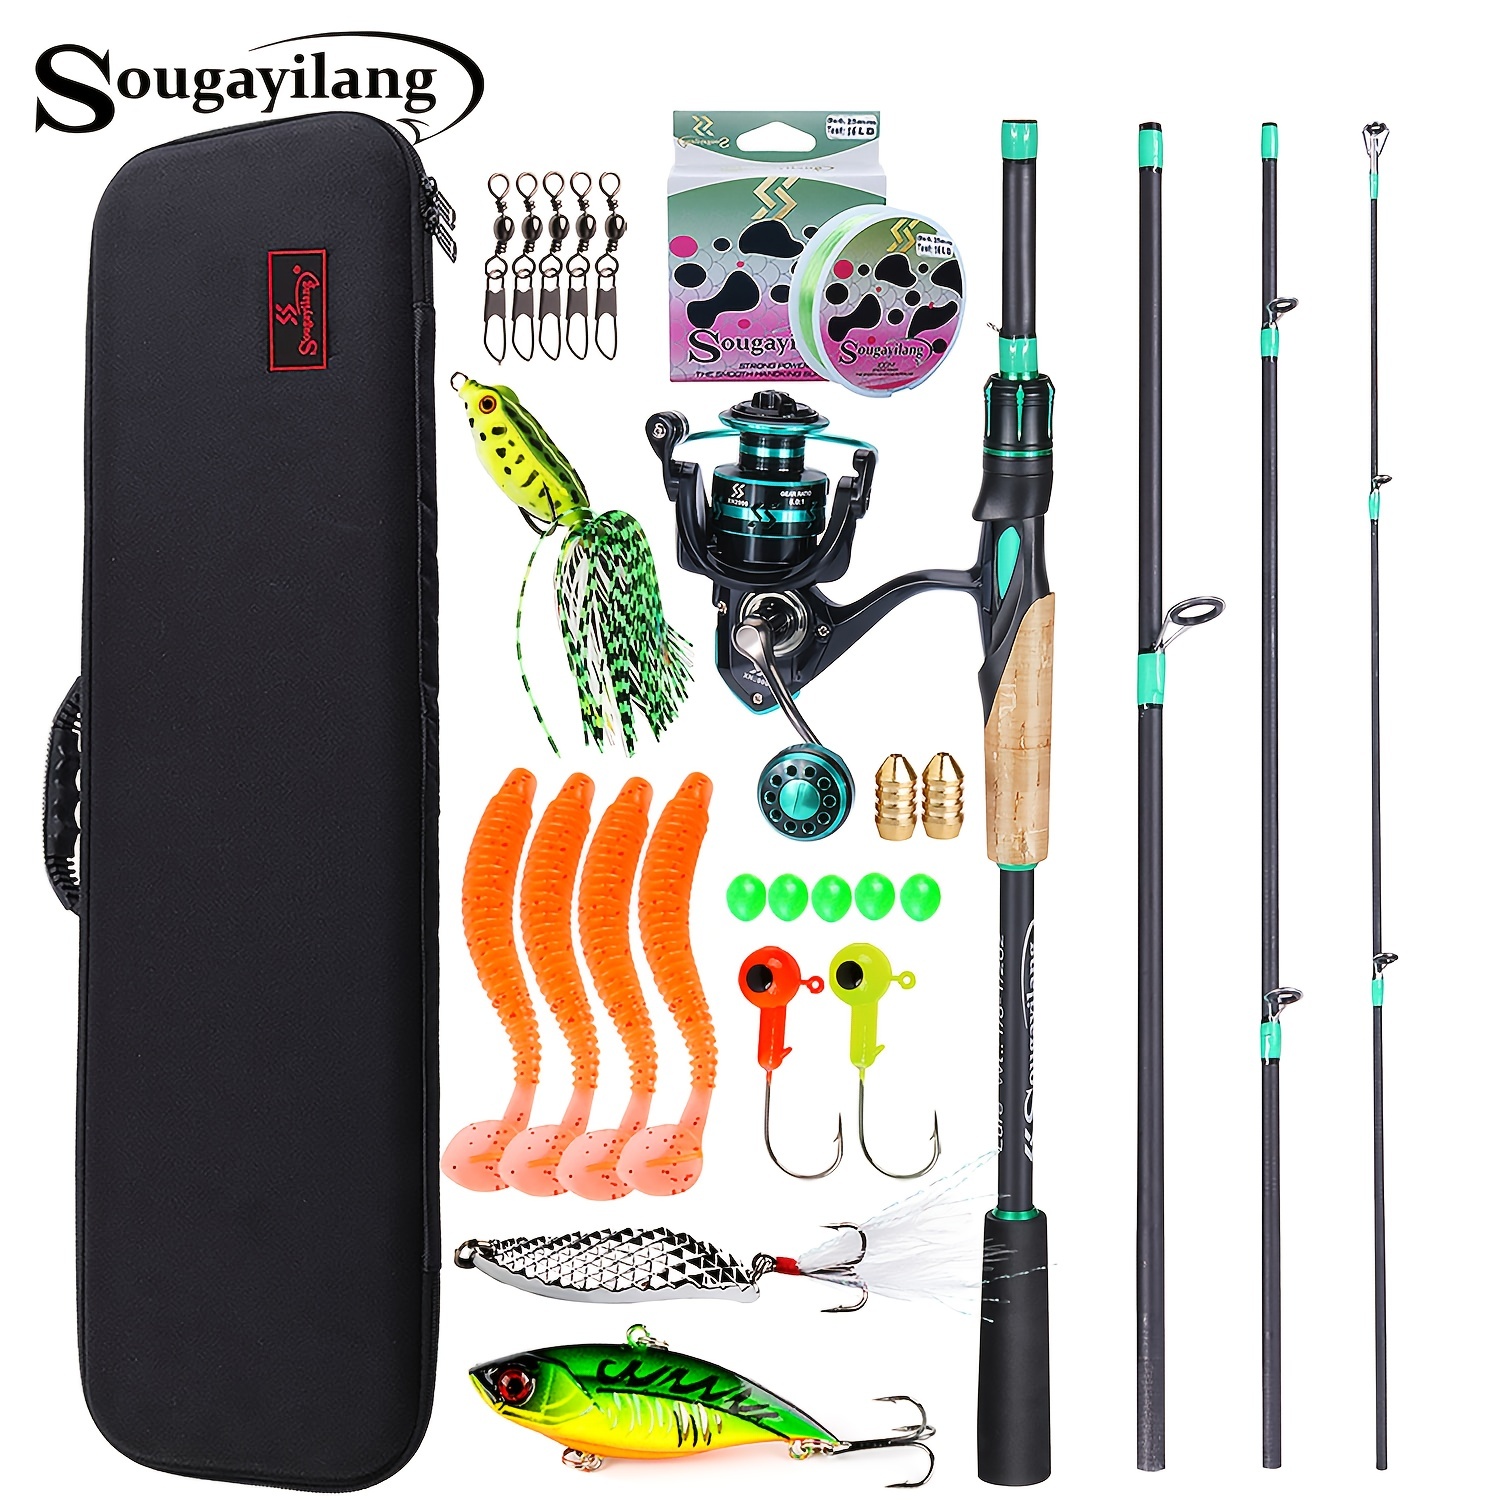 Sougayilang 1 Set Fishing Rod And Reel Combo, Including 4 Sections Portable  Carbon Rod, 5.0:1 Gear Ratio 12+1 BB Spinning Reel, Fishing Bait, And More